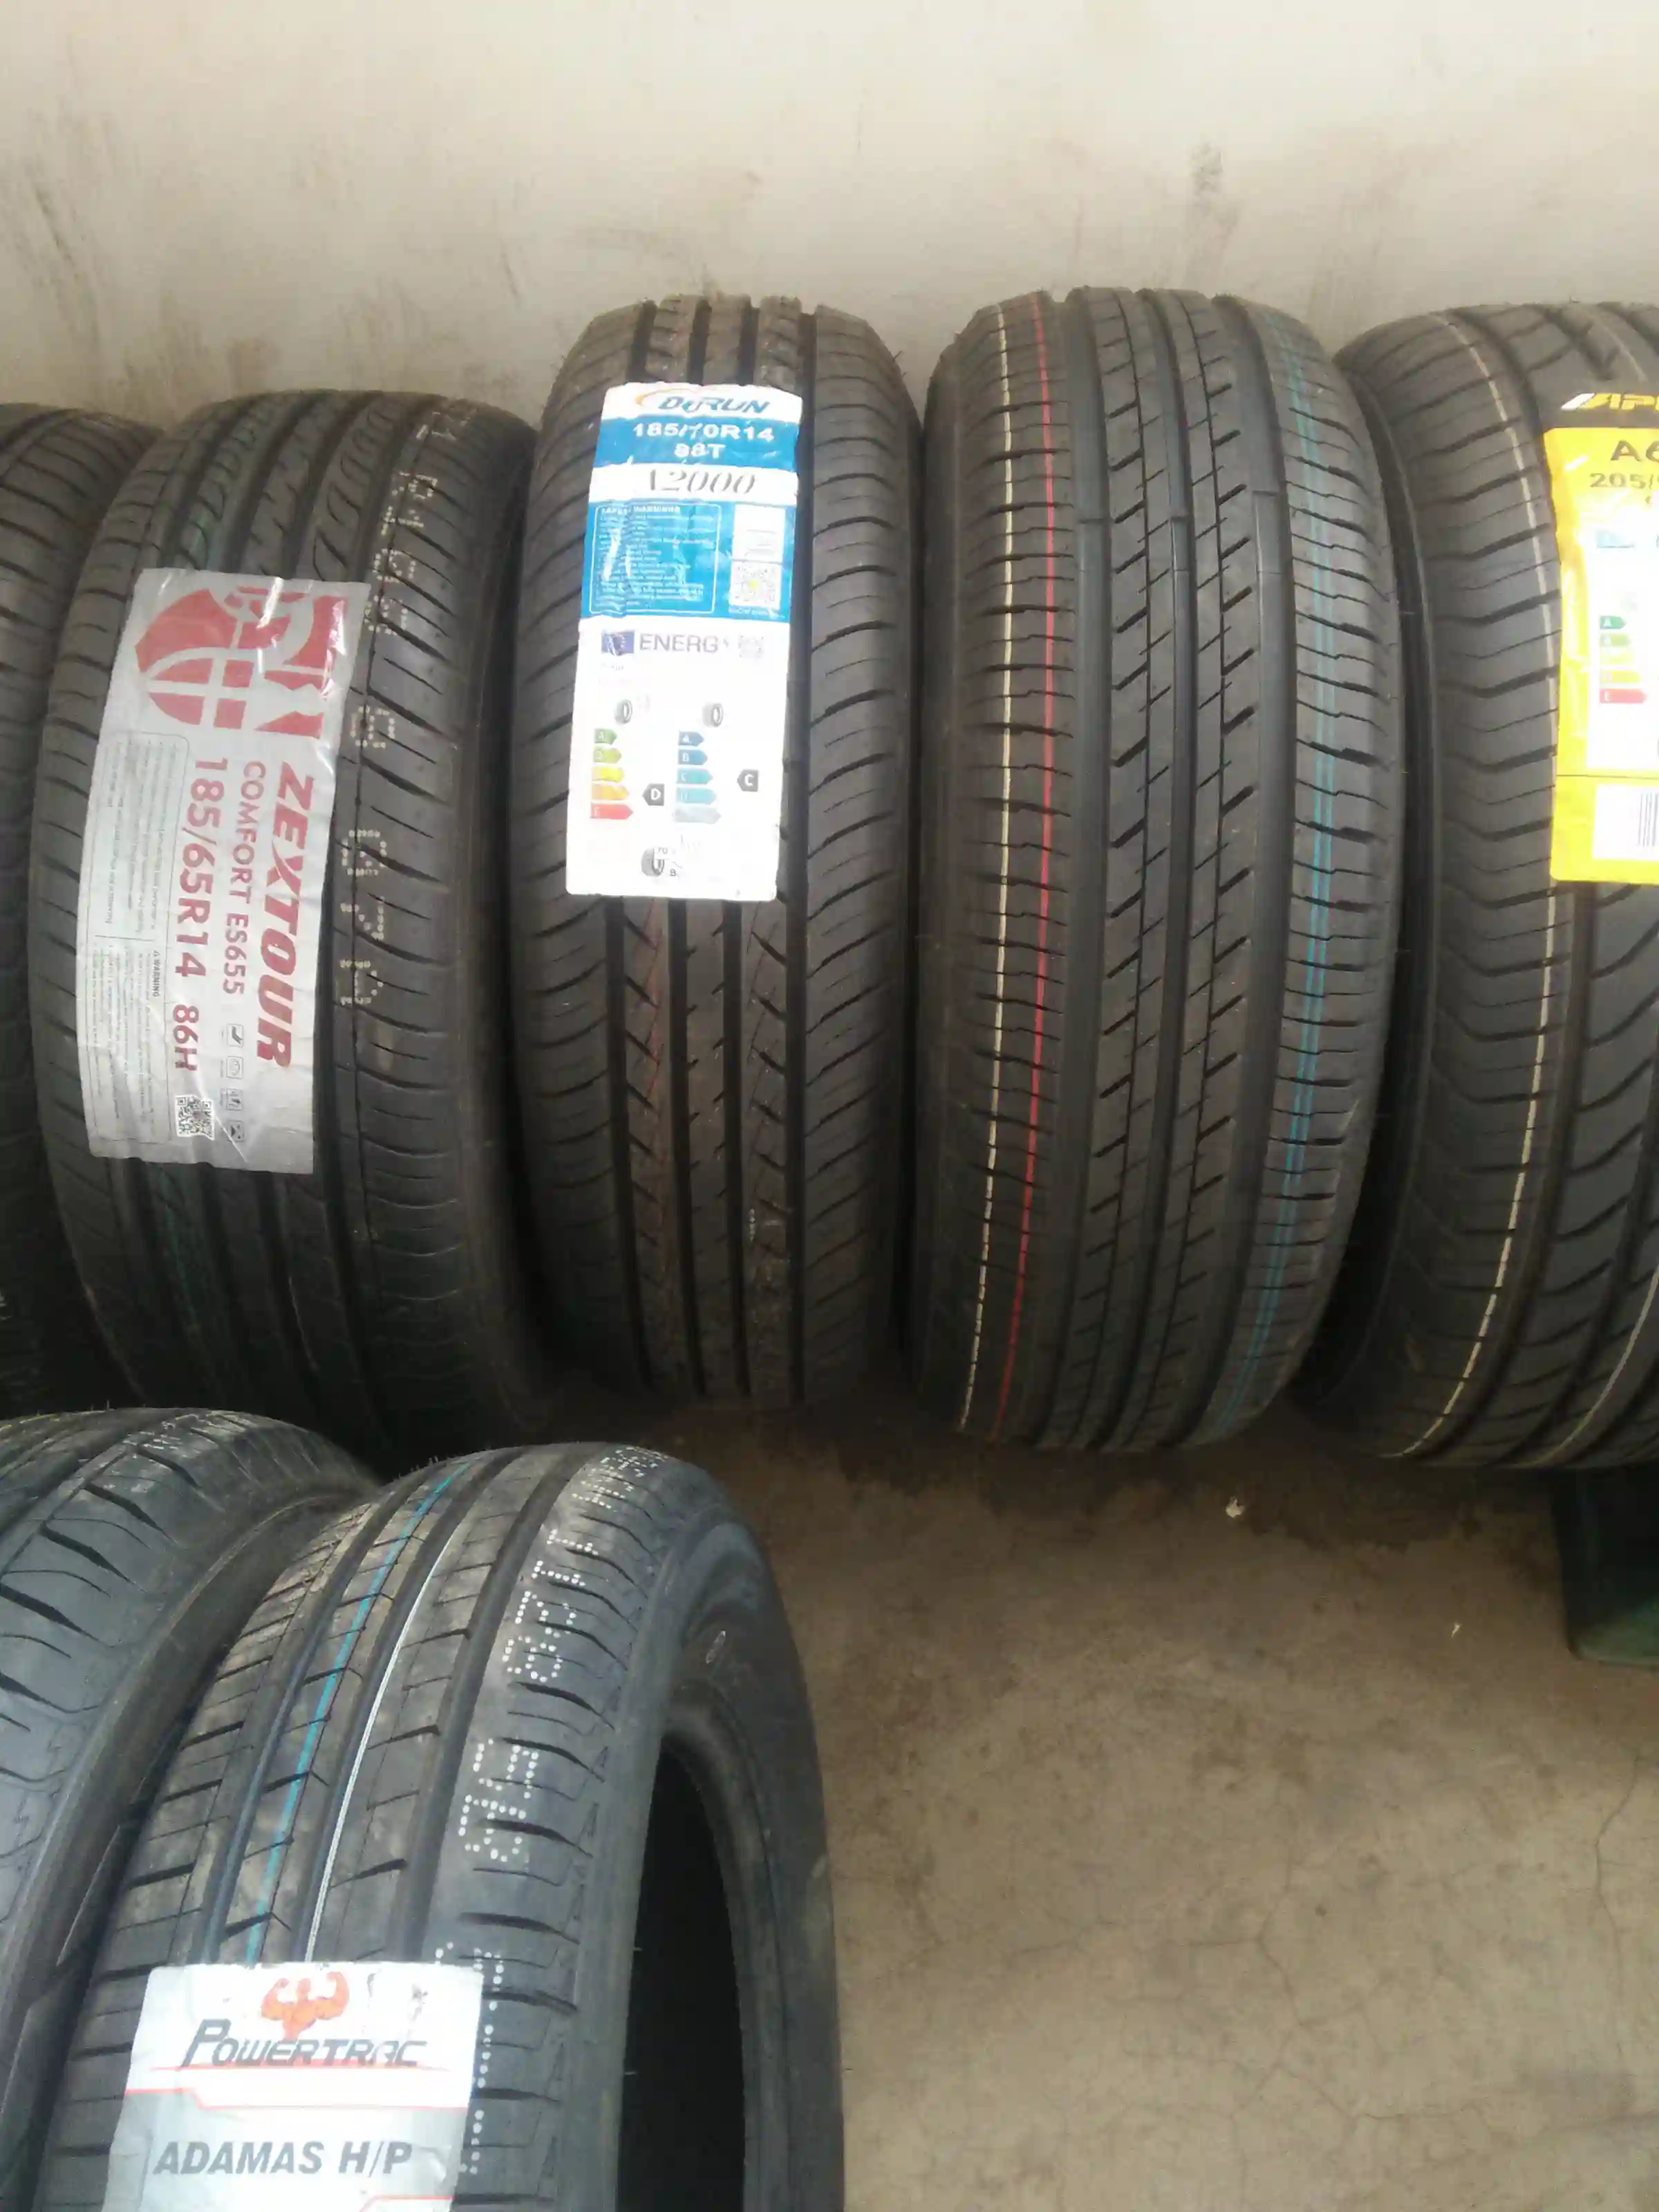 TYRES FOR SALE HARARE ZIMBABWE